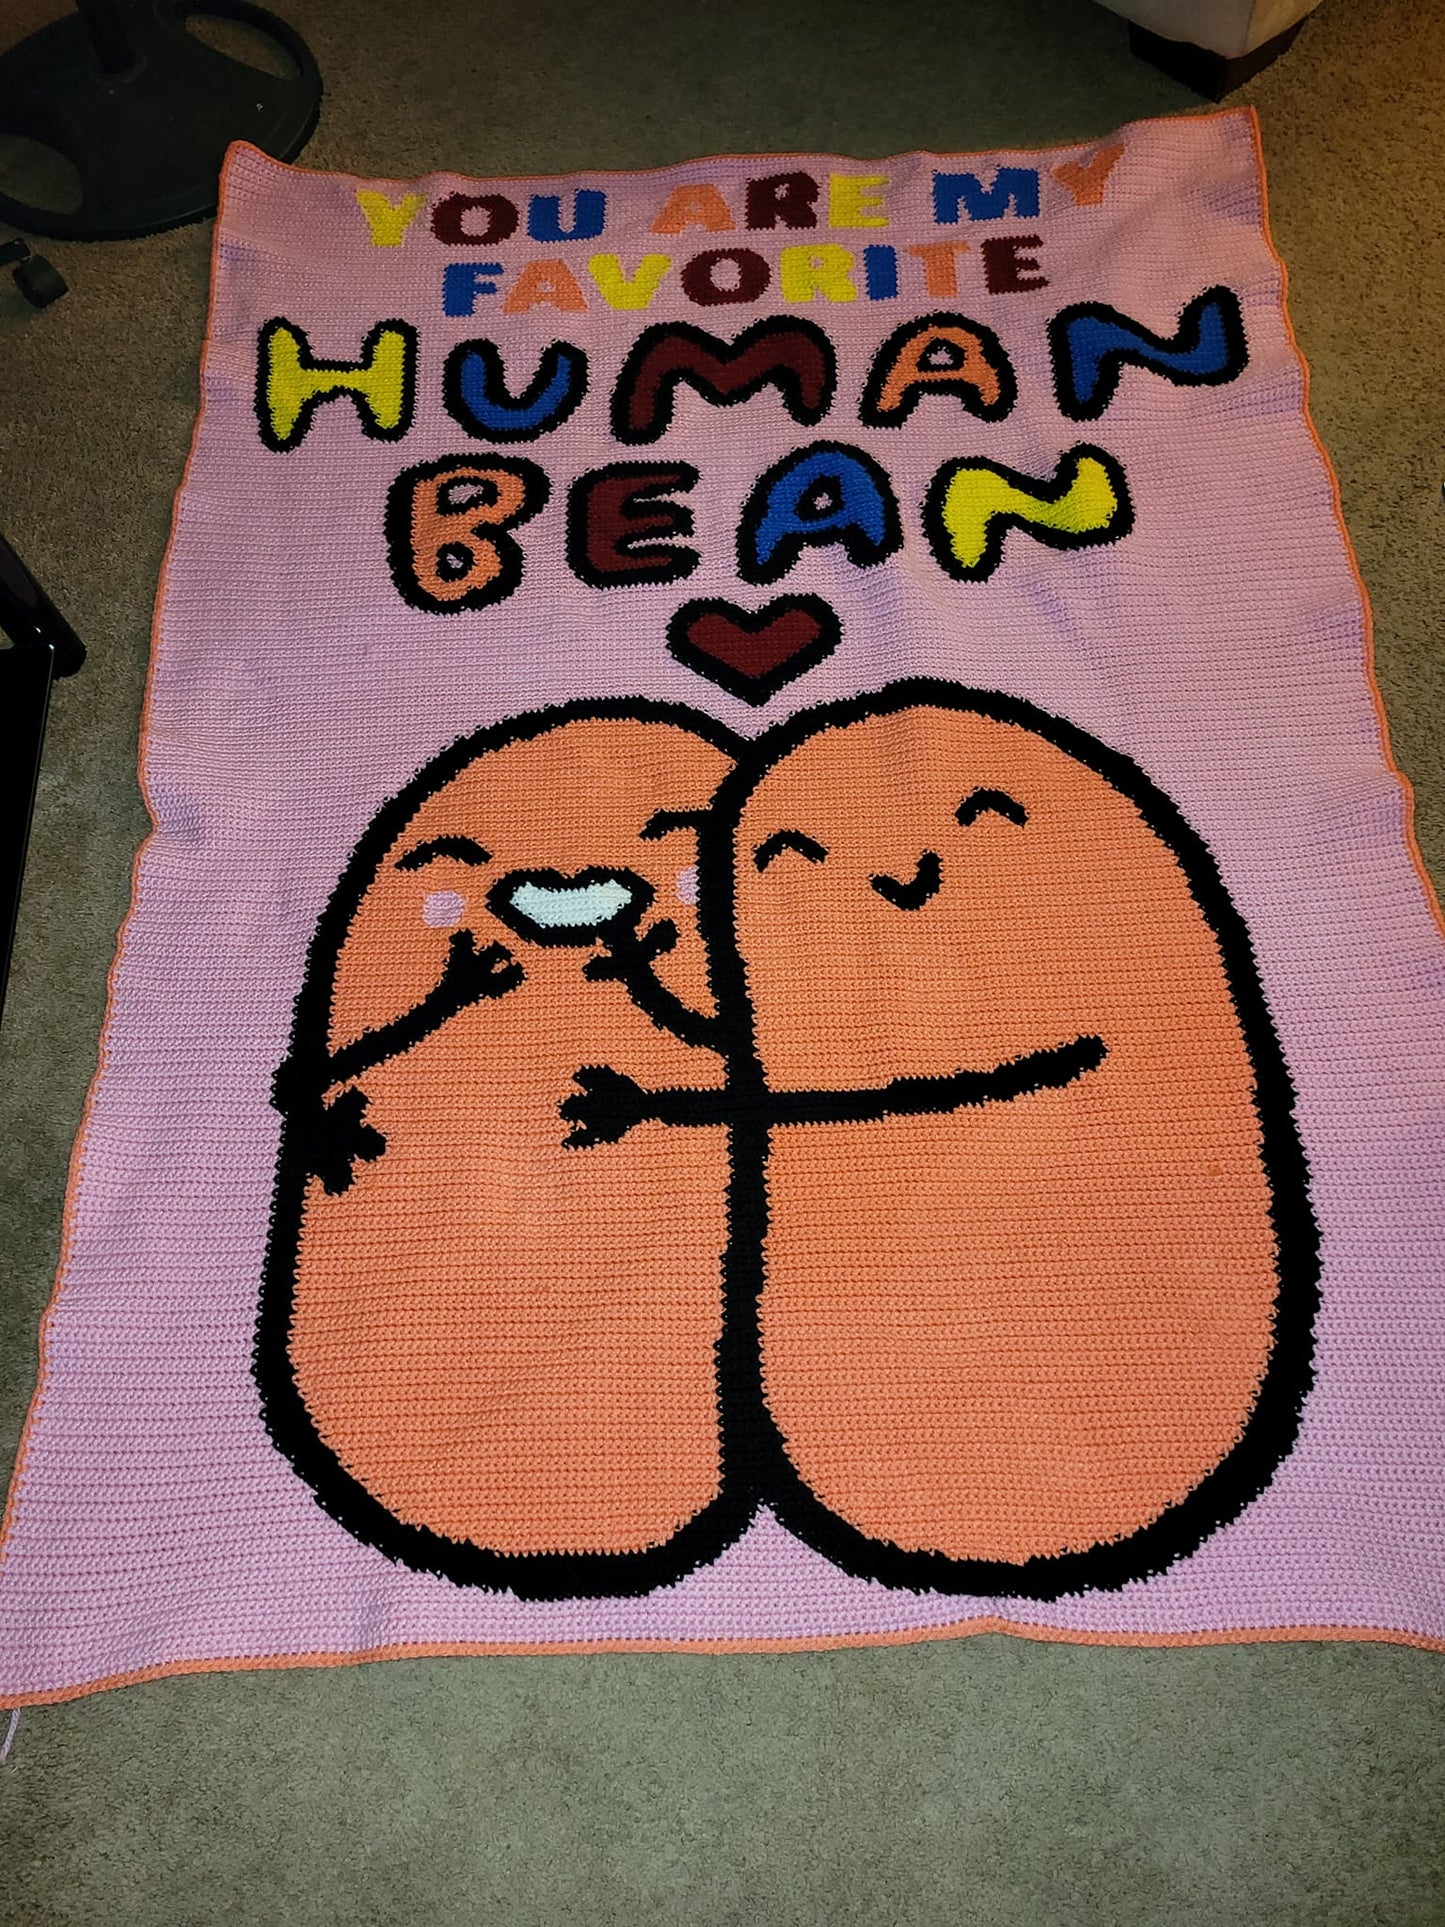 You Are My Favorite Human Bean Crochet Graphghan Pattern